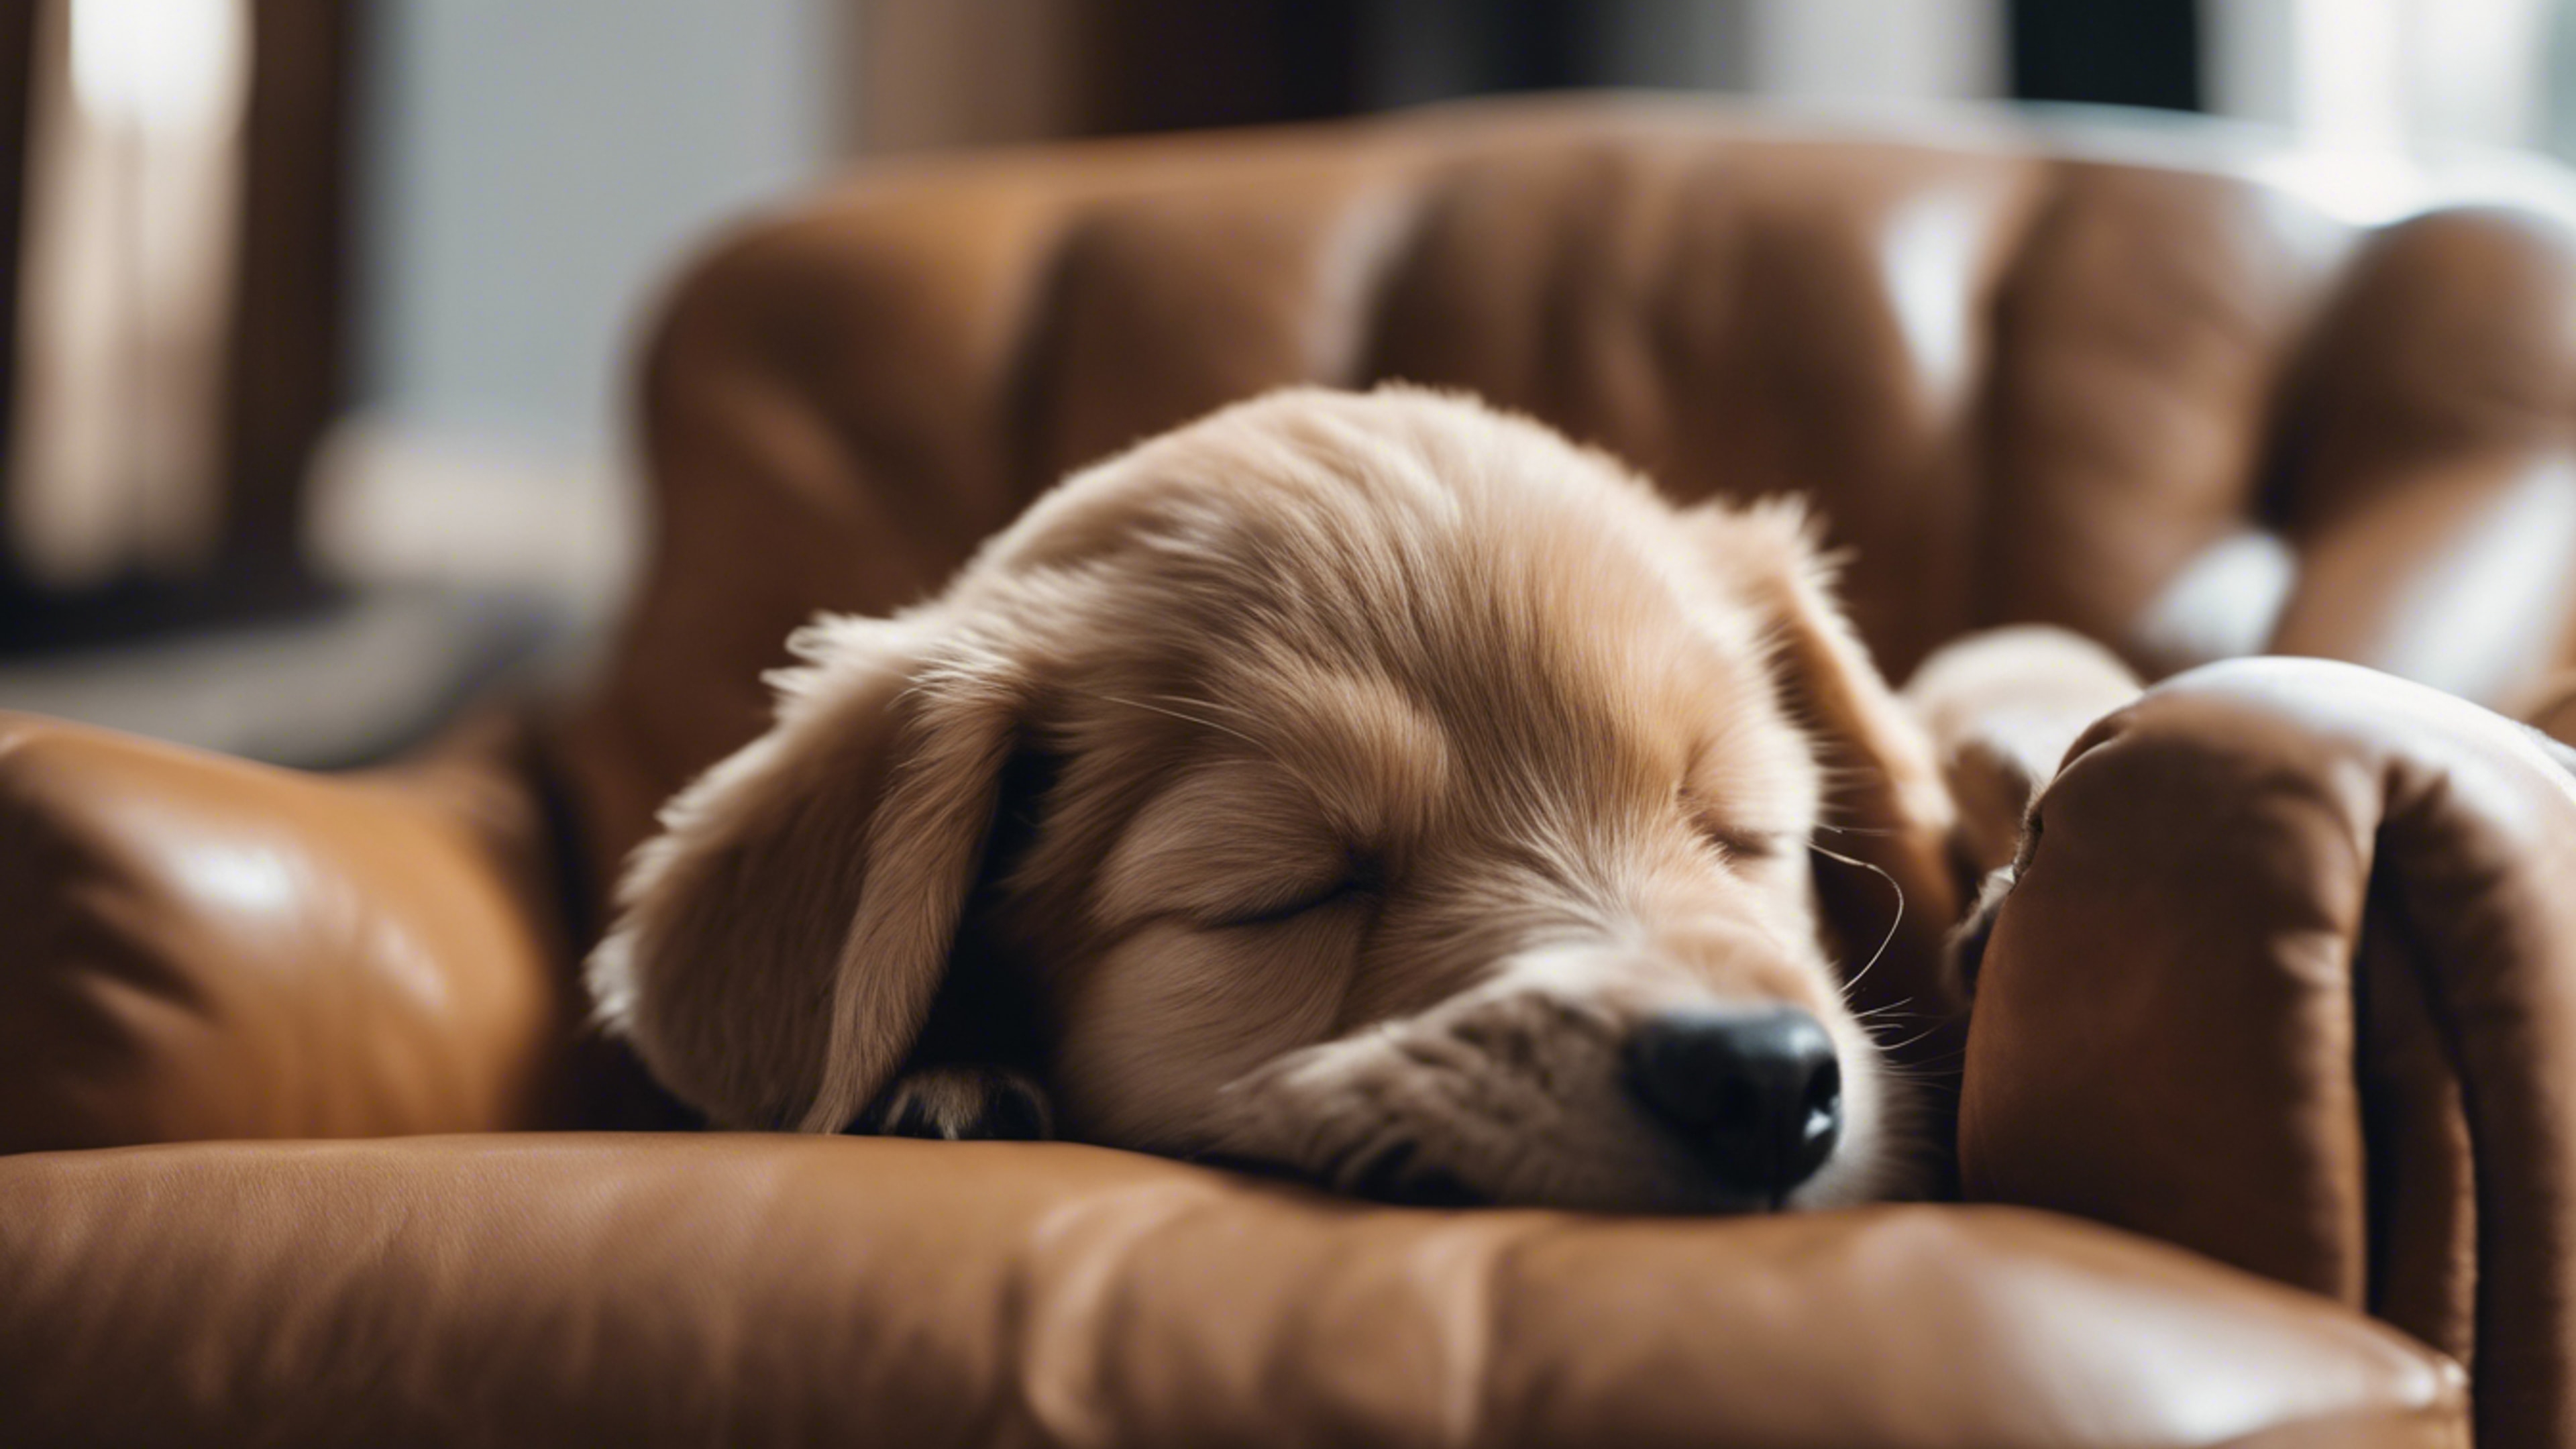 A cute puppy snoozing on a comfortable, oversized brown leather armchair. Tapet[9200ee1466b7462a9782]